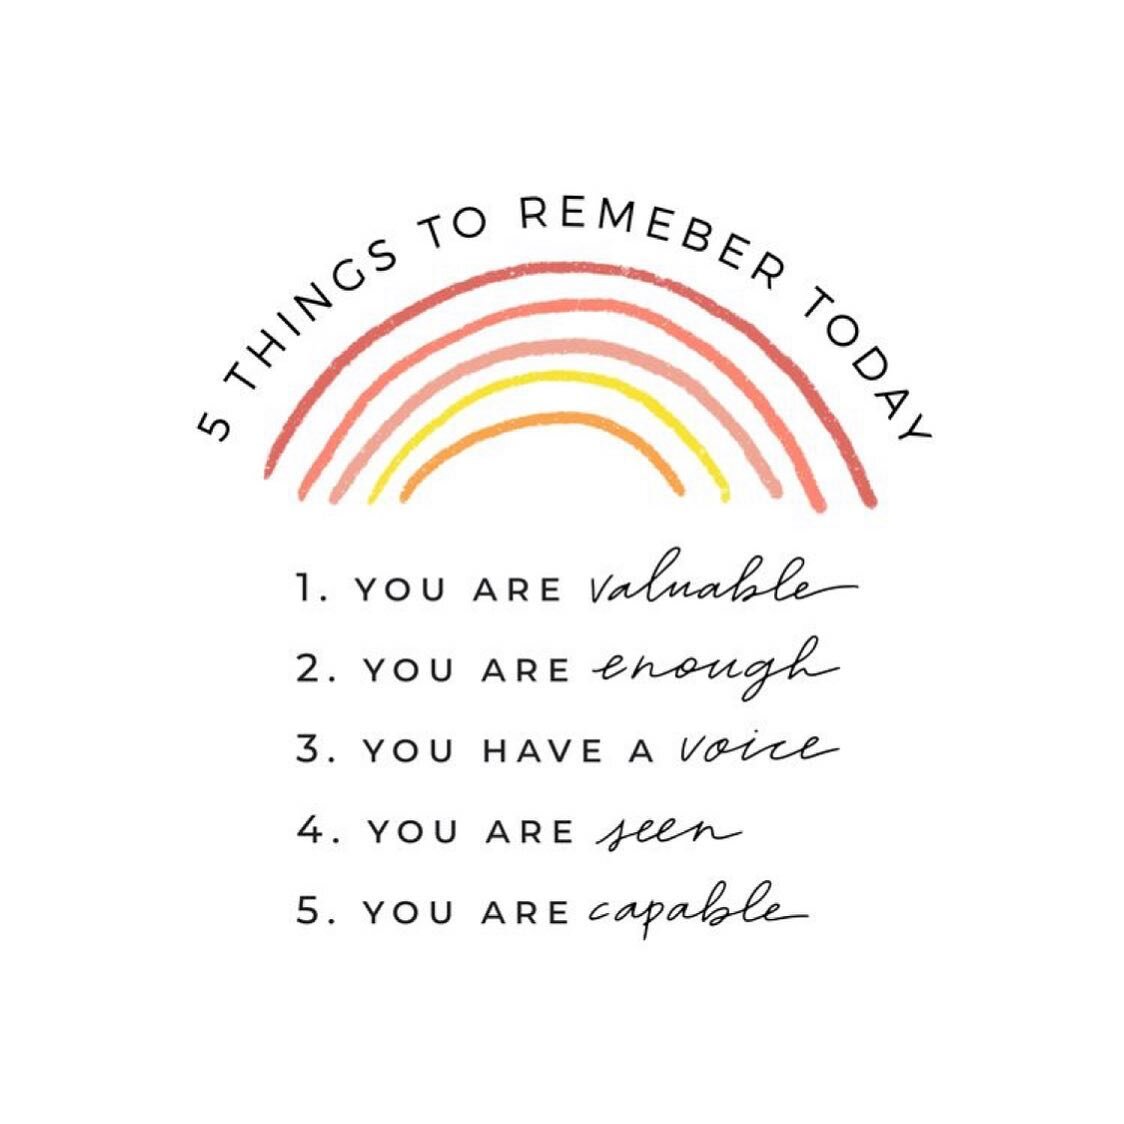 Monday Motivation:
THANK YOURSELF

Stand in front of the mirror, and tell yourself &ldquo;Thank you&rdquo; out loud. Do this at least once! Psychology Today wrote an article talking about the importance of studying aloud for memory. This can be appli